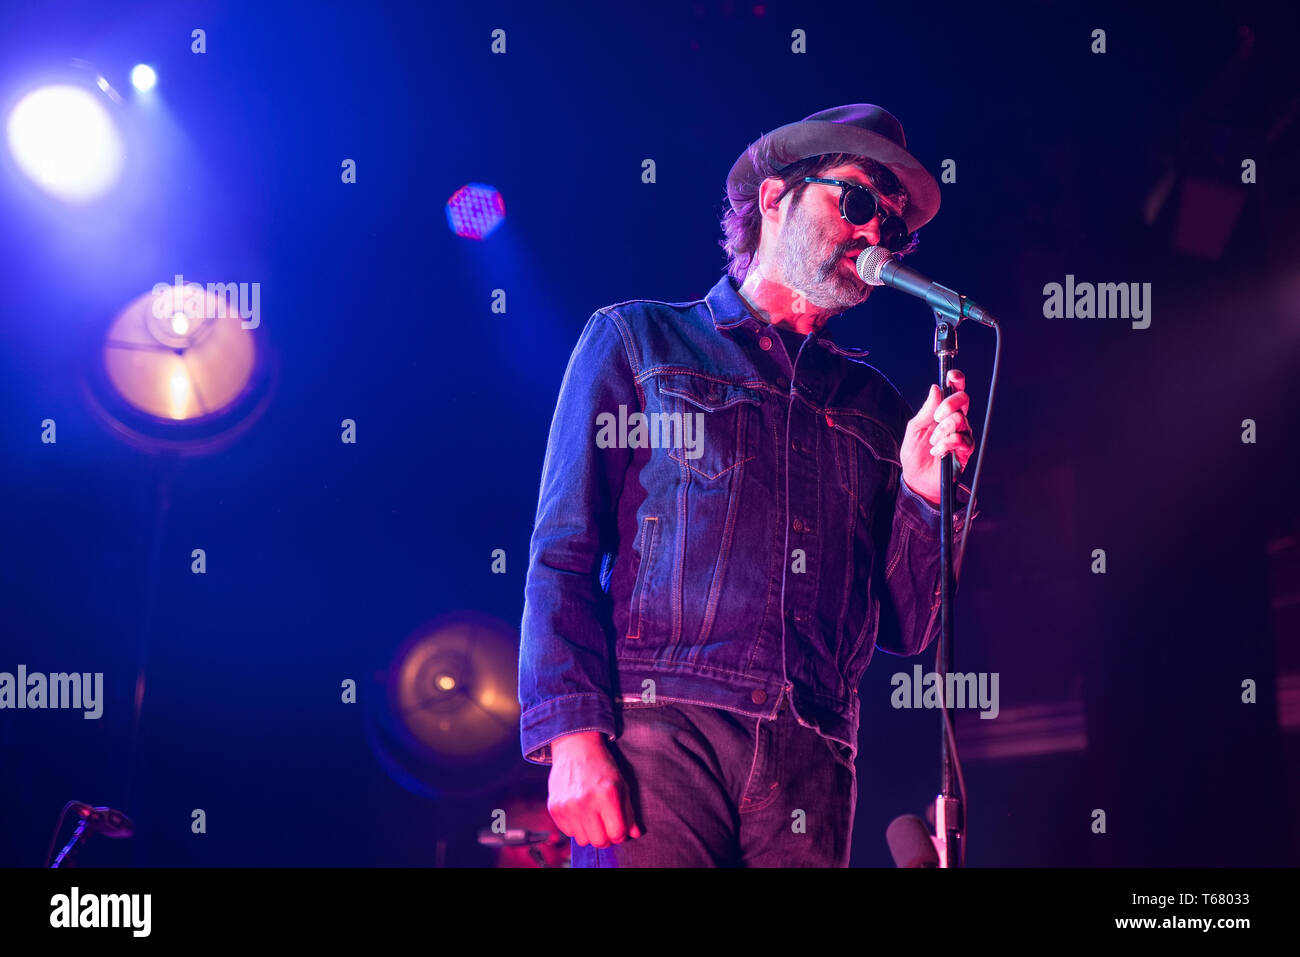 Eels Band High Resolution Stock Photography and Images - Alamy